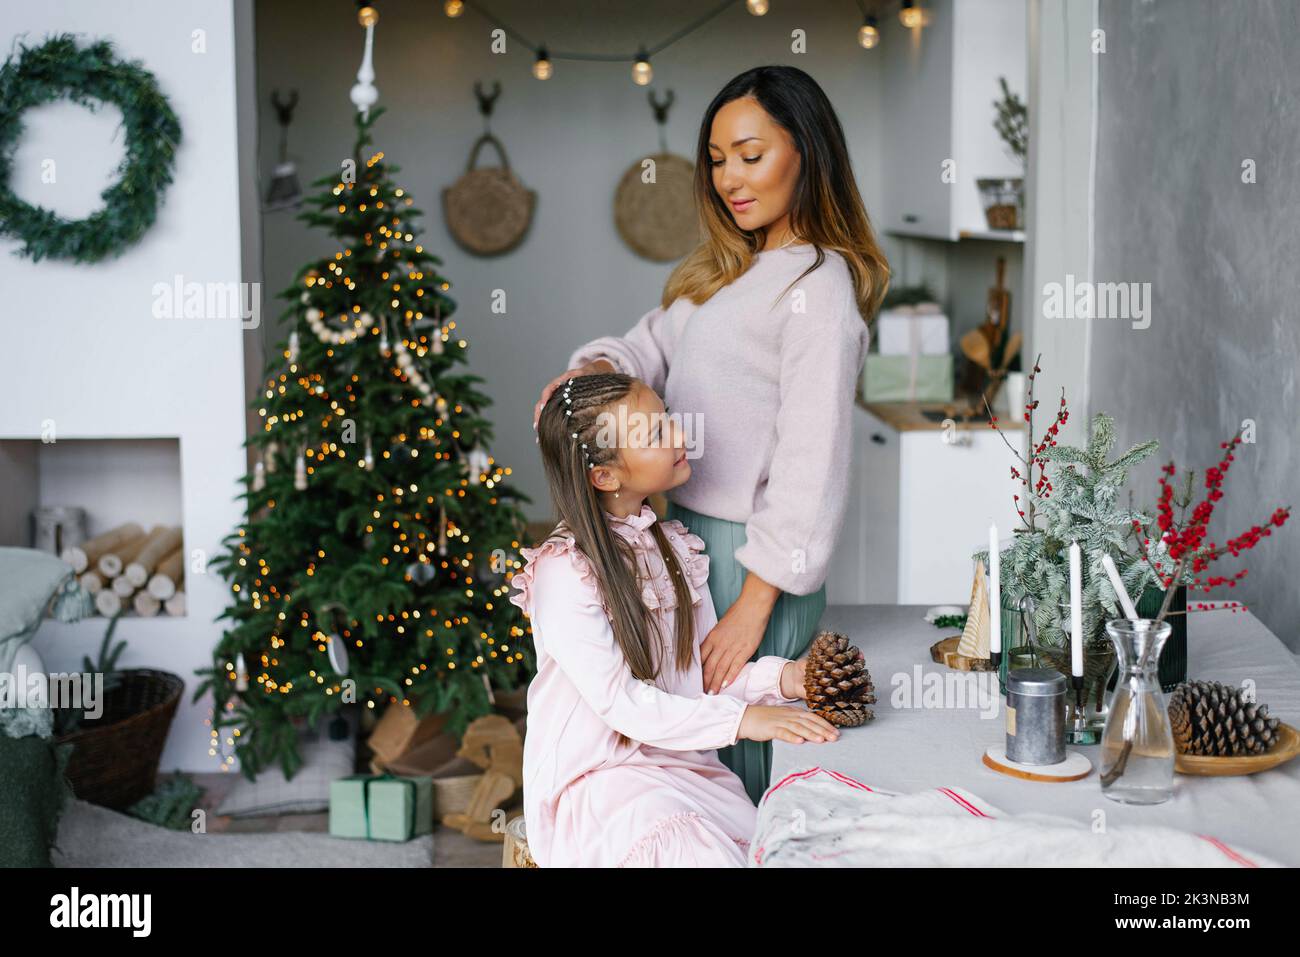 Girl is sitting at a table in the living room decorated for Christmas Stock Photo